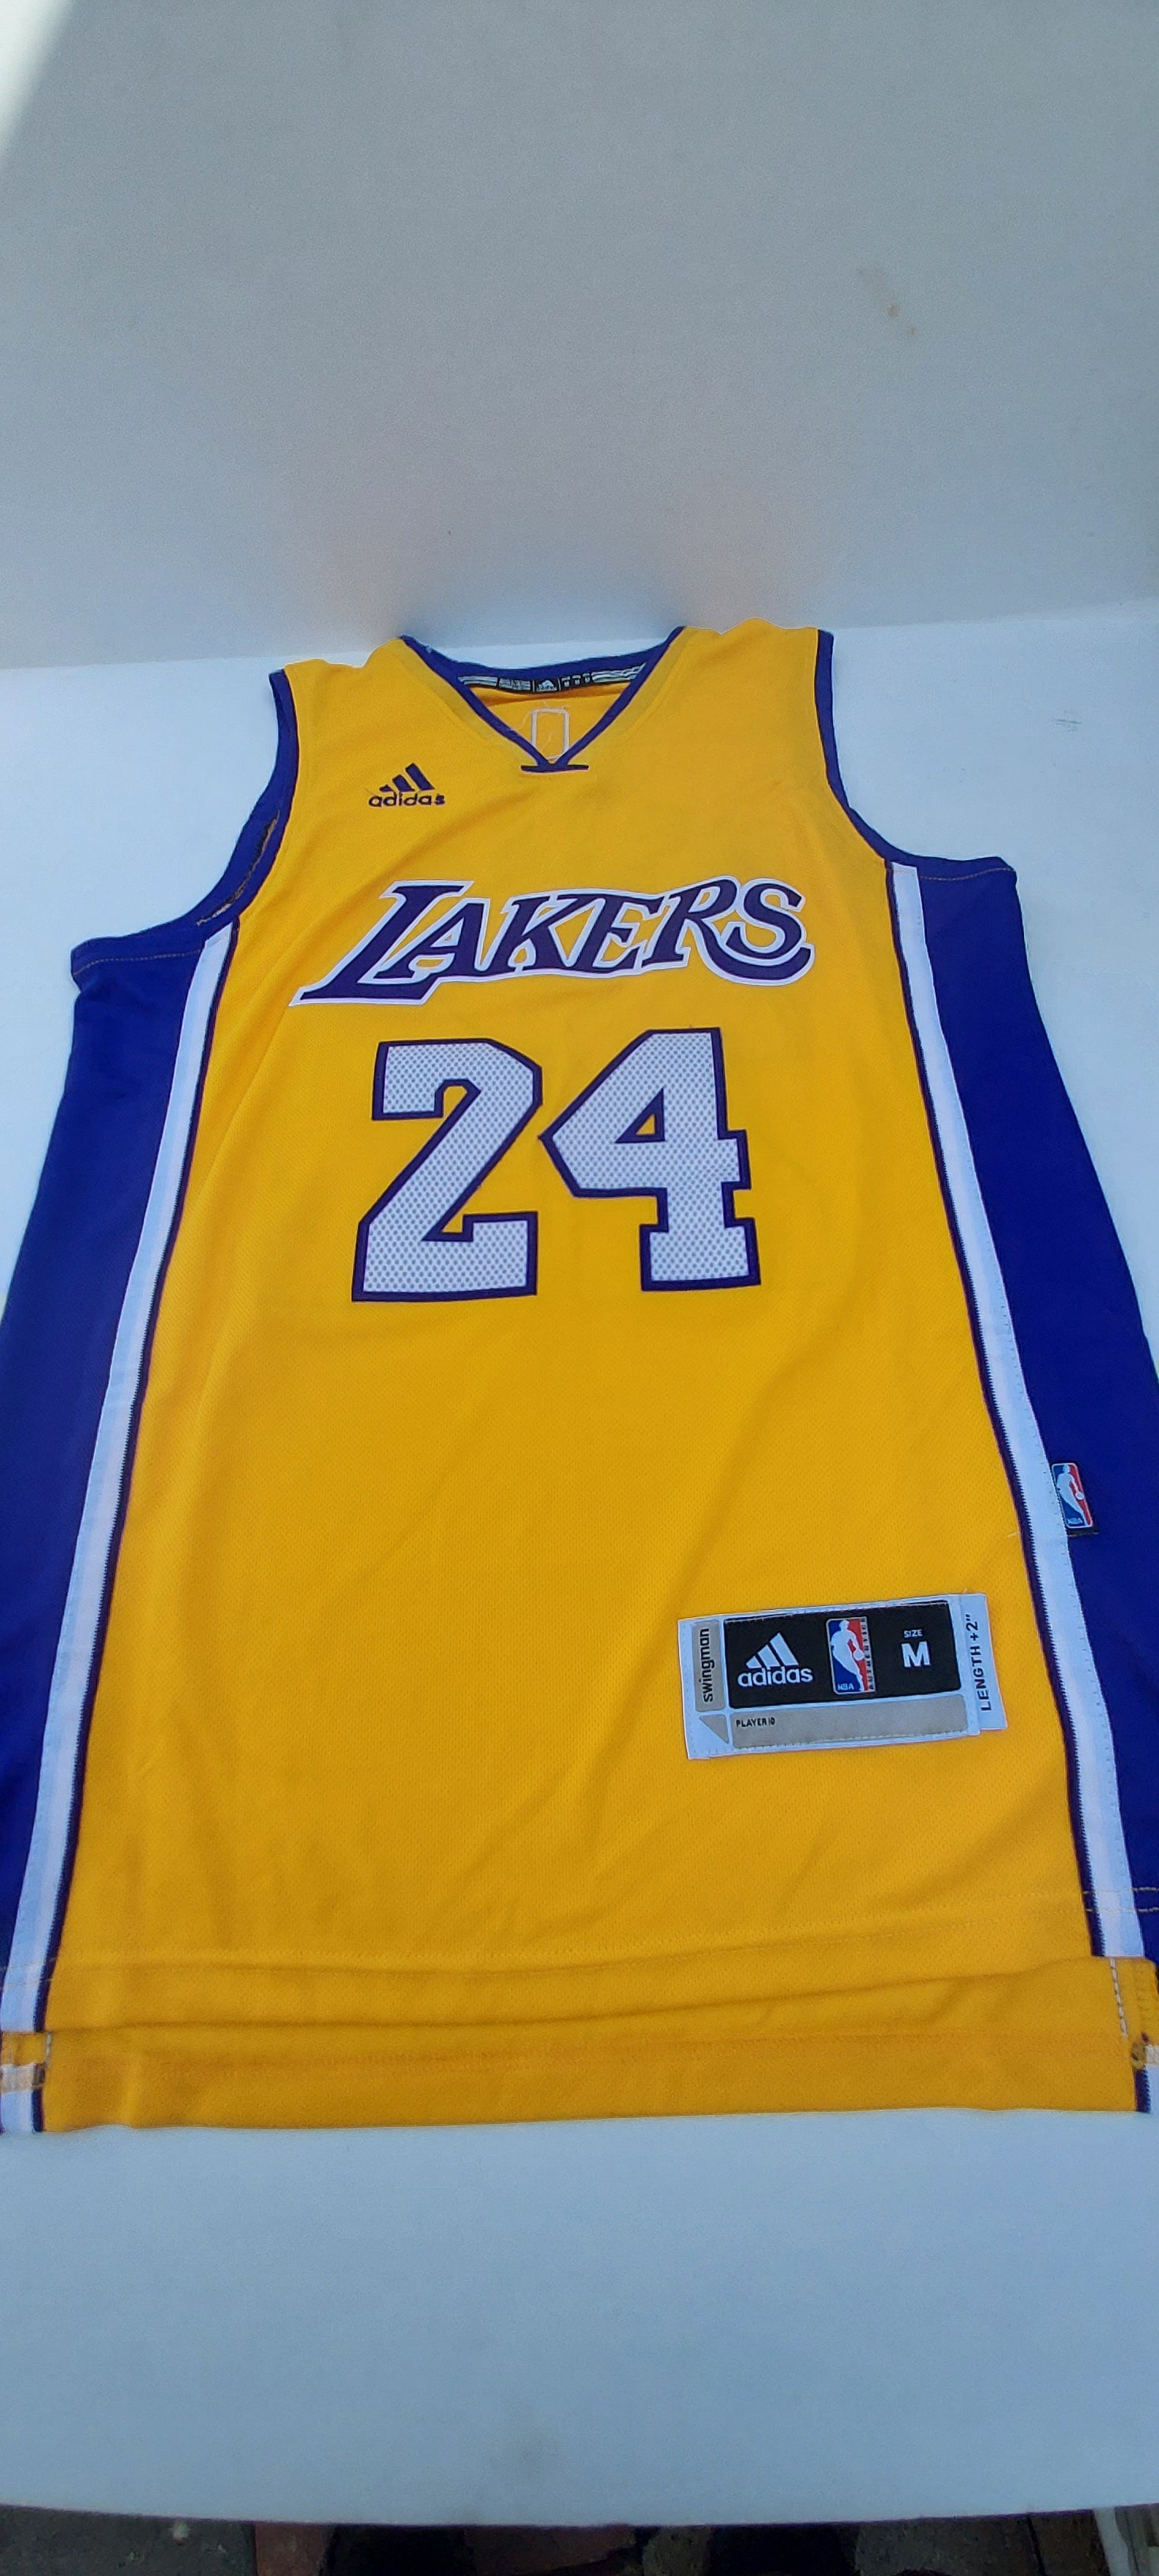 Kobe Bryant Los Angeles Lakers signed game YELLOW model jersey with proof